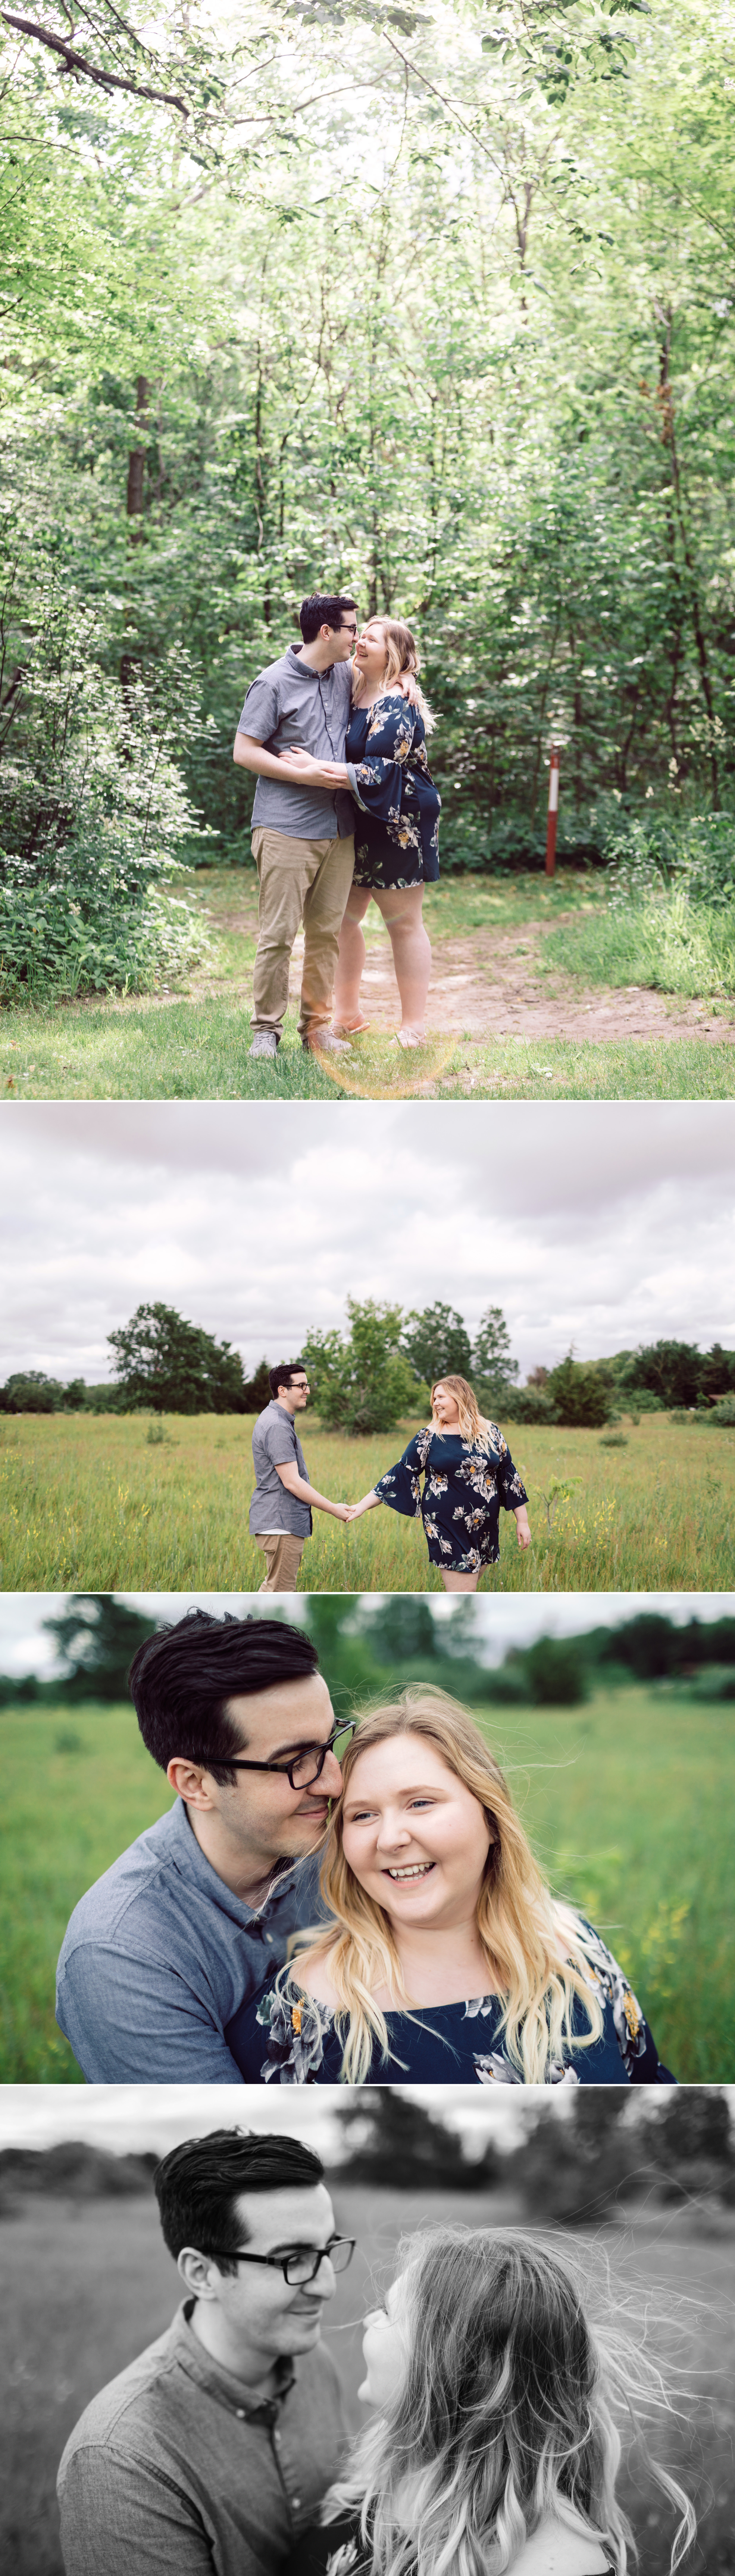 Detroit engagement photographer captures images of couple at Maybury State Park in Detroit